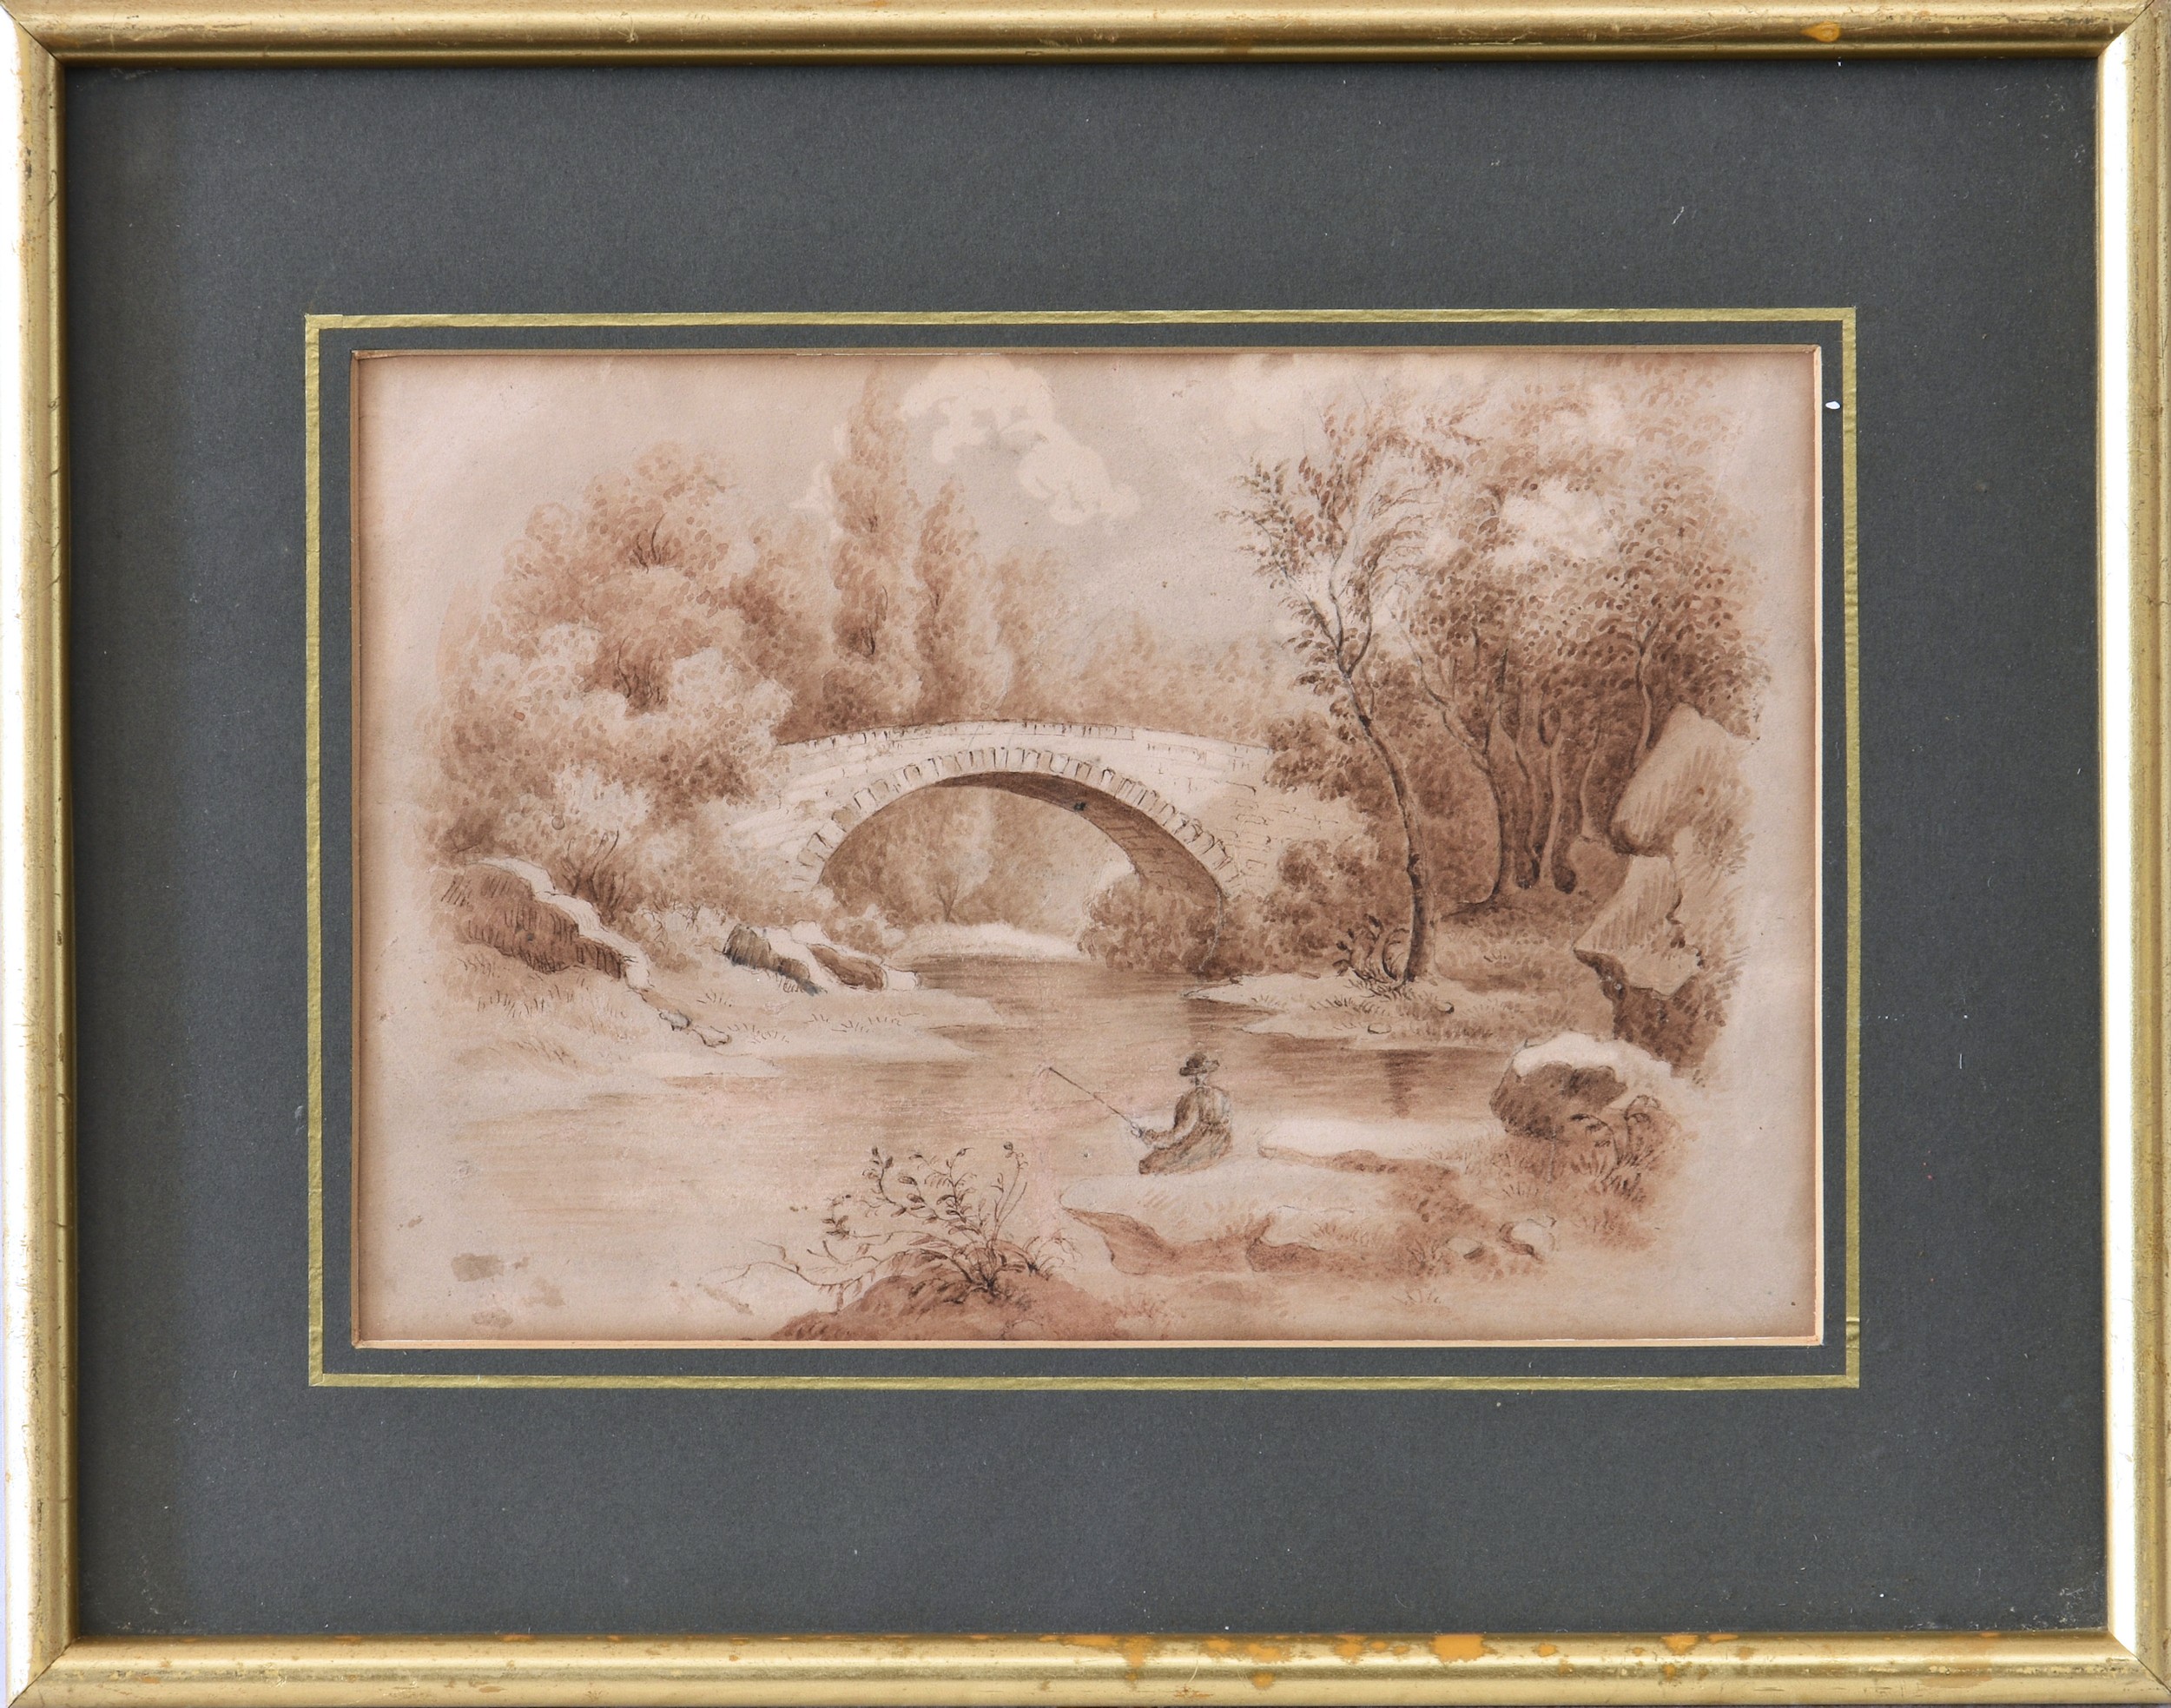 English School, early 19th century, Pair of River Landscapes, pen and ink and sepia watercolour, one - Image 4 of 4